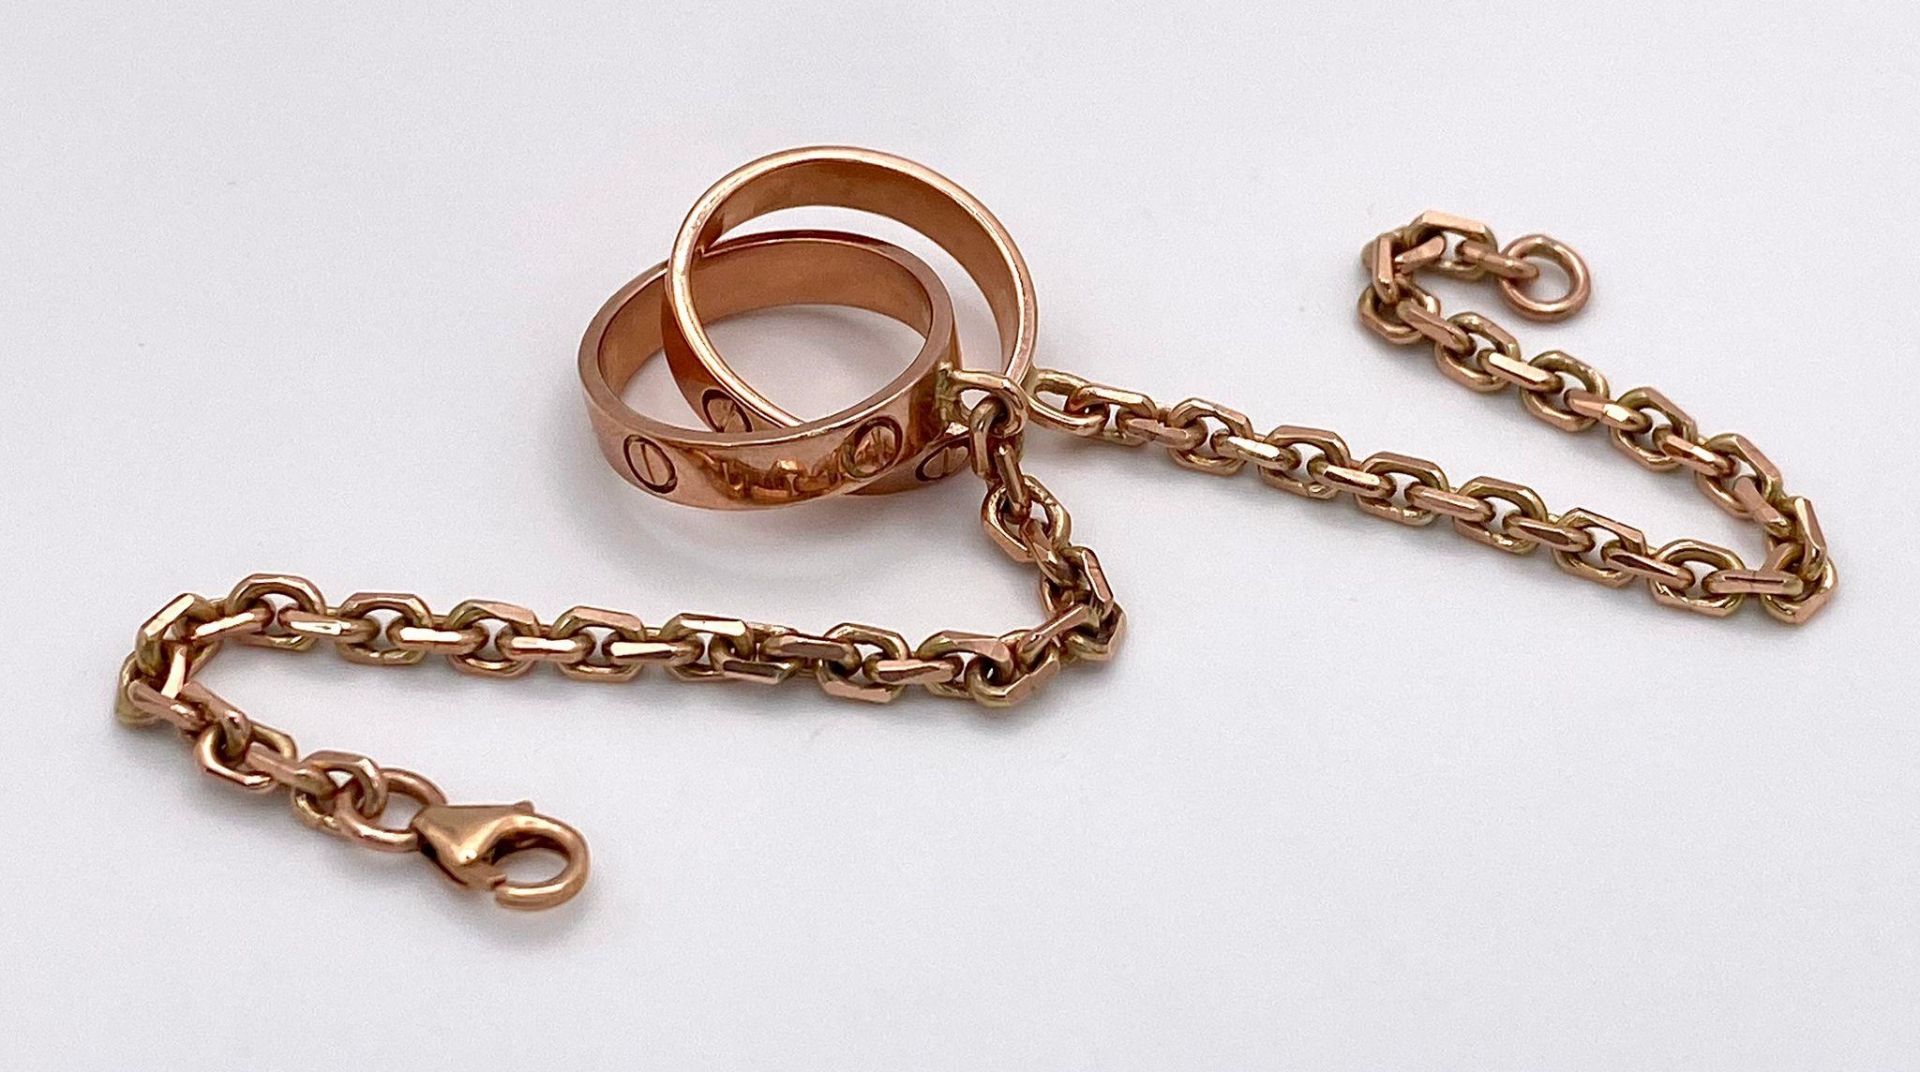 A 9K Rose Gold Entwined Ring Bracelet. 18cm length. 10.7g weight. - Image 3 of 4